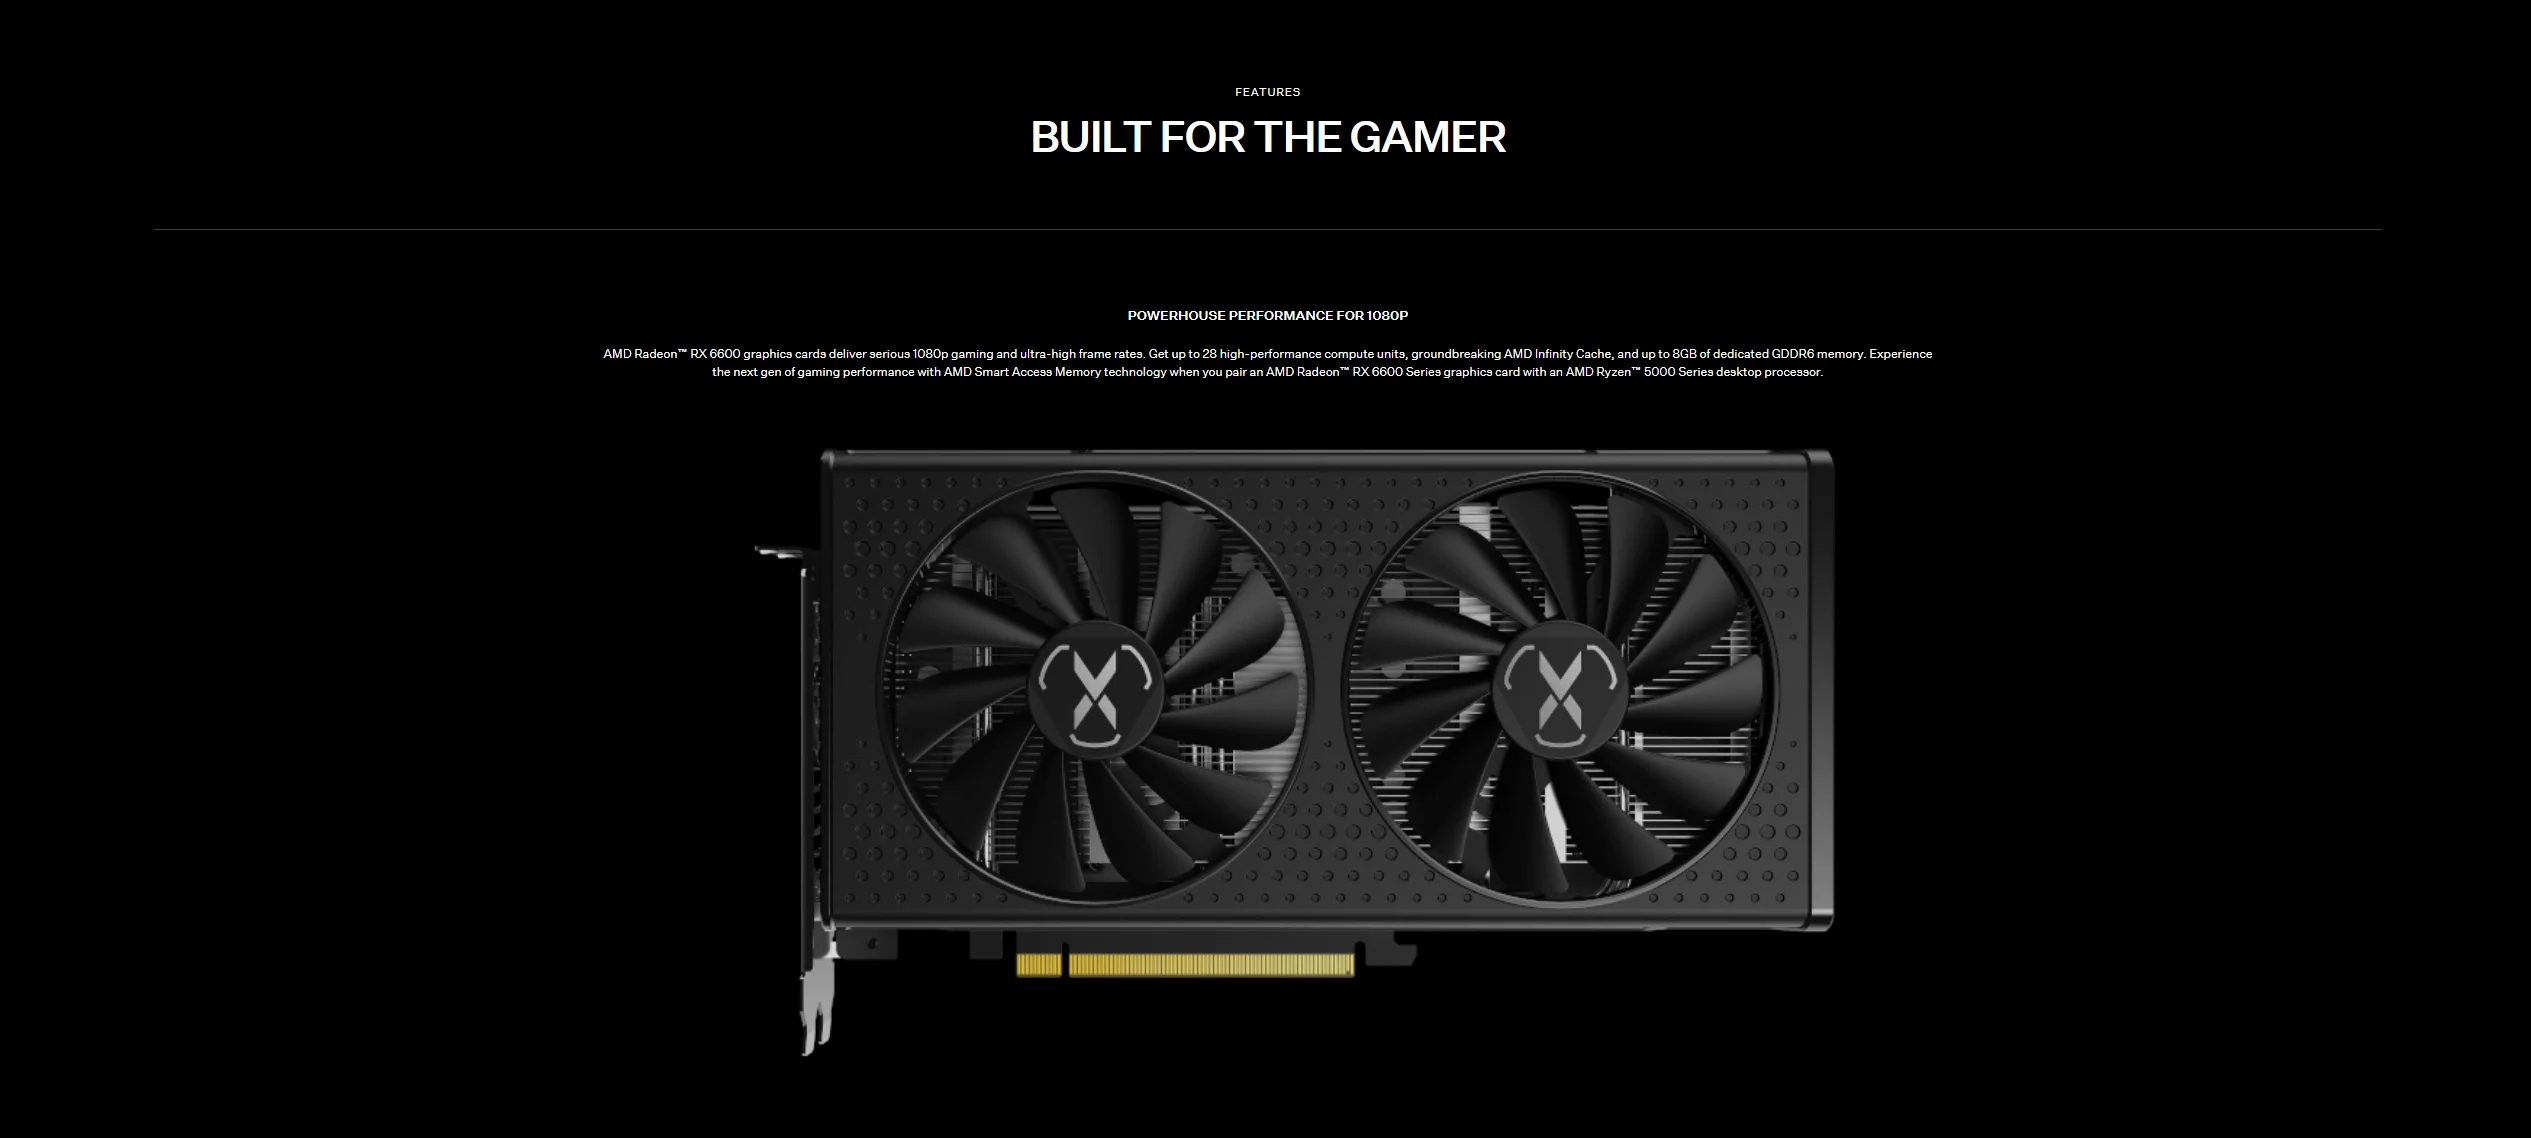 best graphics card for gaming pc XFX AMD Radeon RX 6600 NEW Core Gaming Graphics Card with 8GB GDDR6 AMD 128-bit 7nm GPU support AMD Intel Desktop Motherboard video card in computer